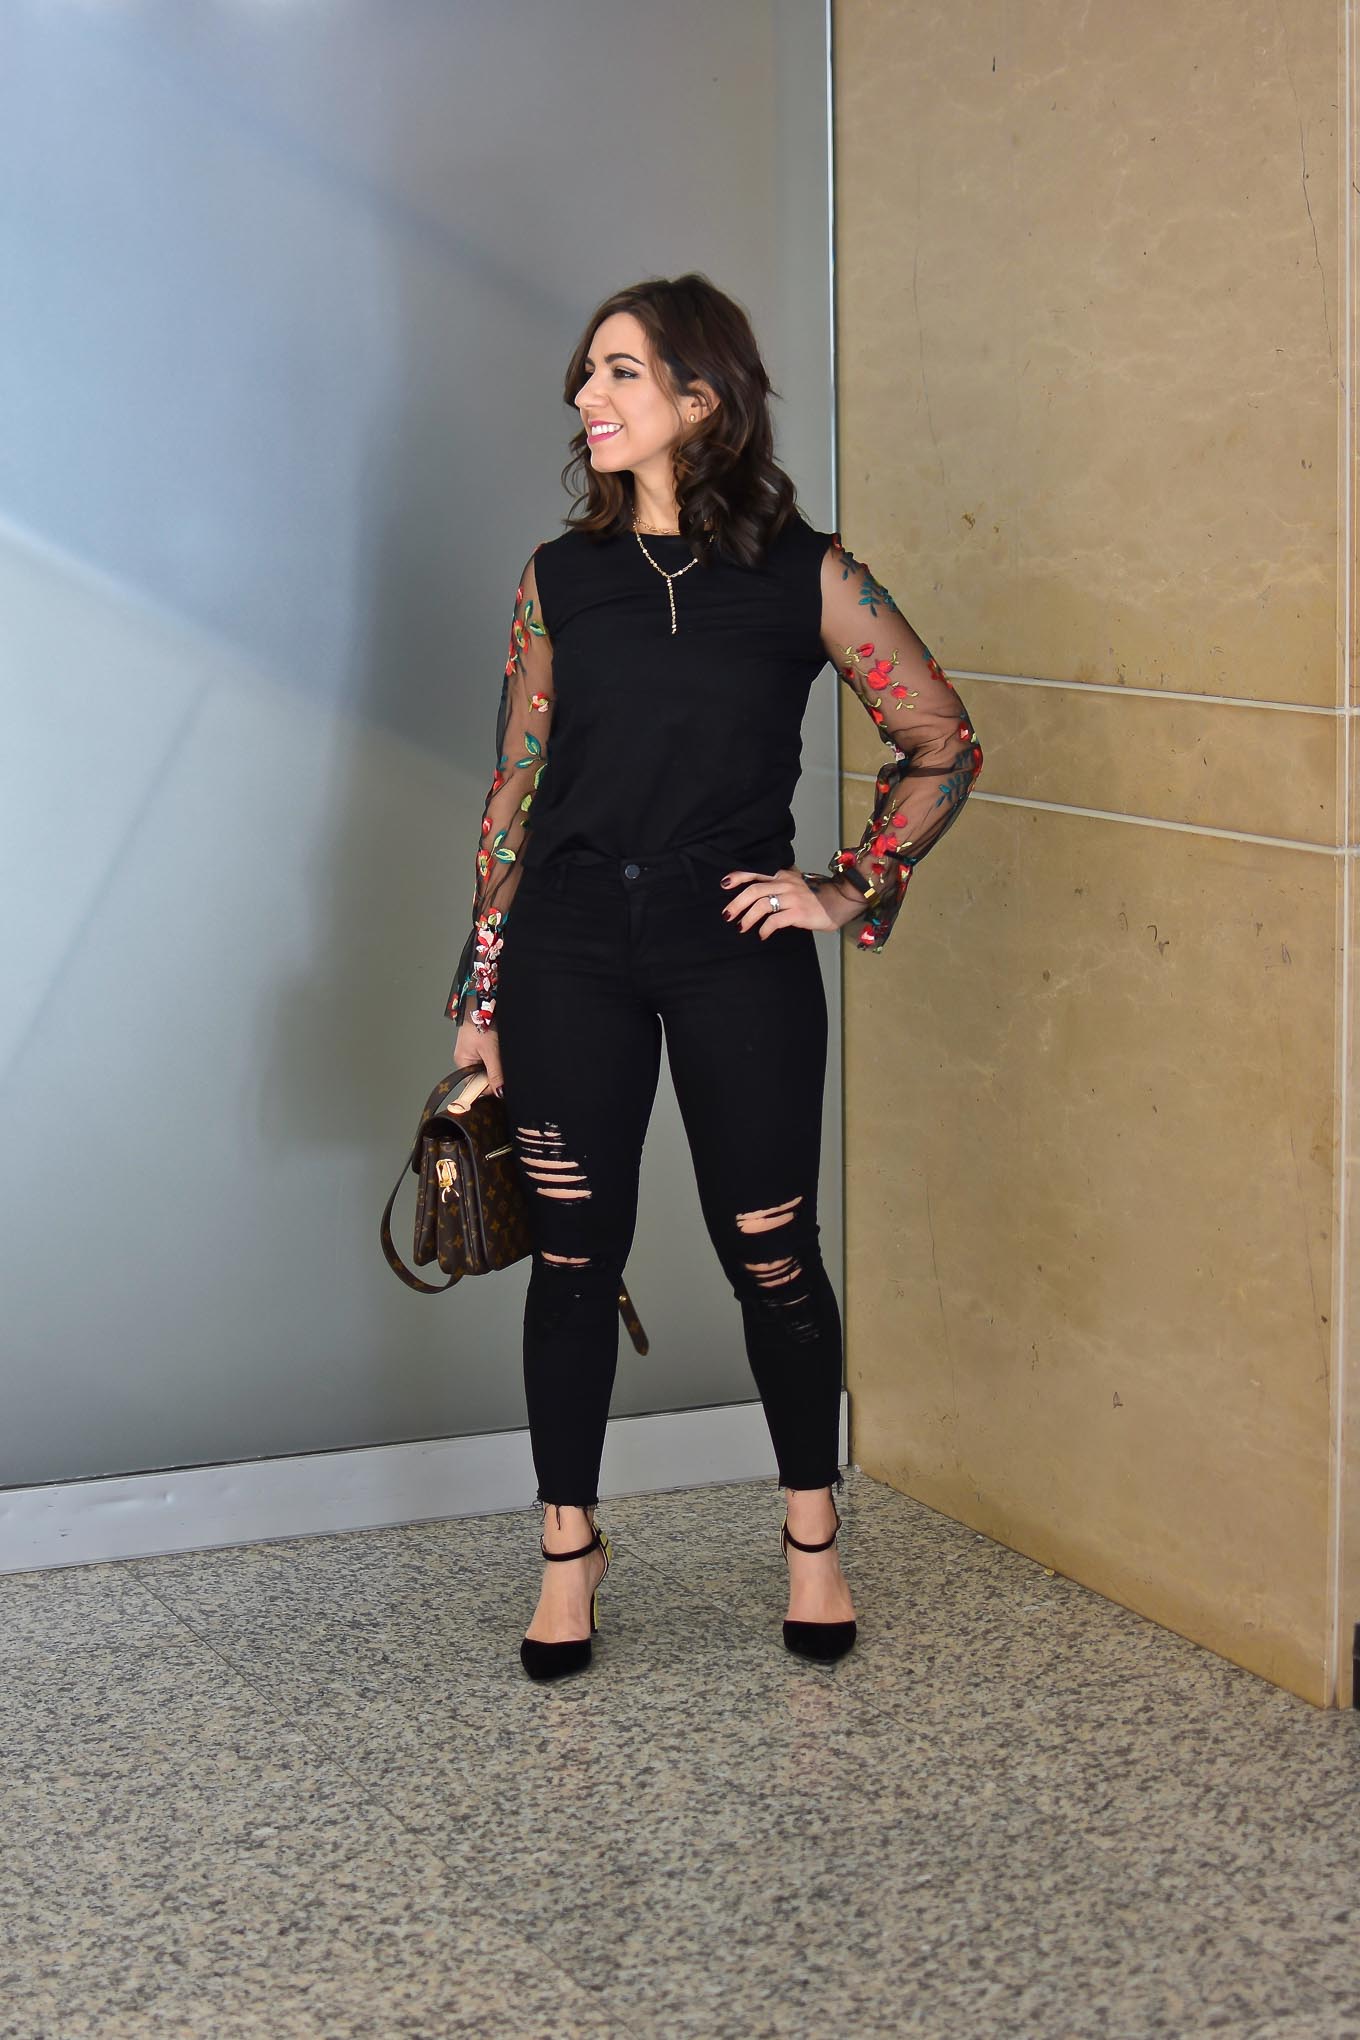 SheIn Embroidered Sleeve top by popular Chicago fashion blogger Glass of Glam